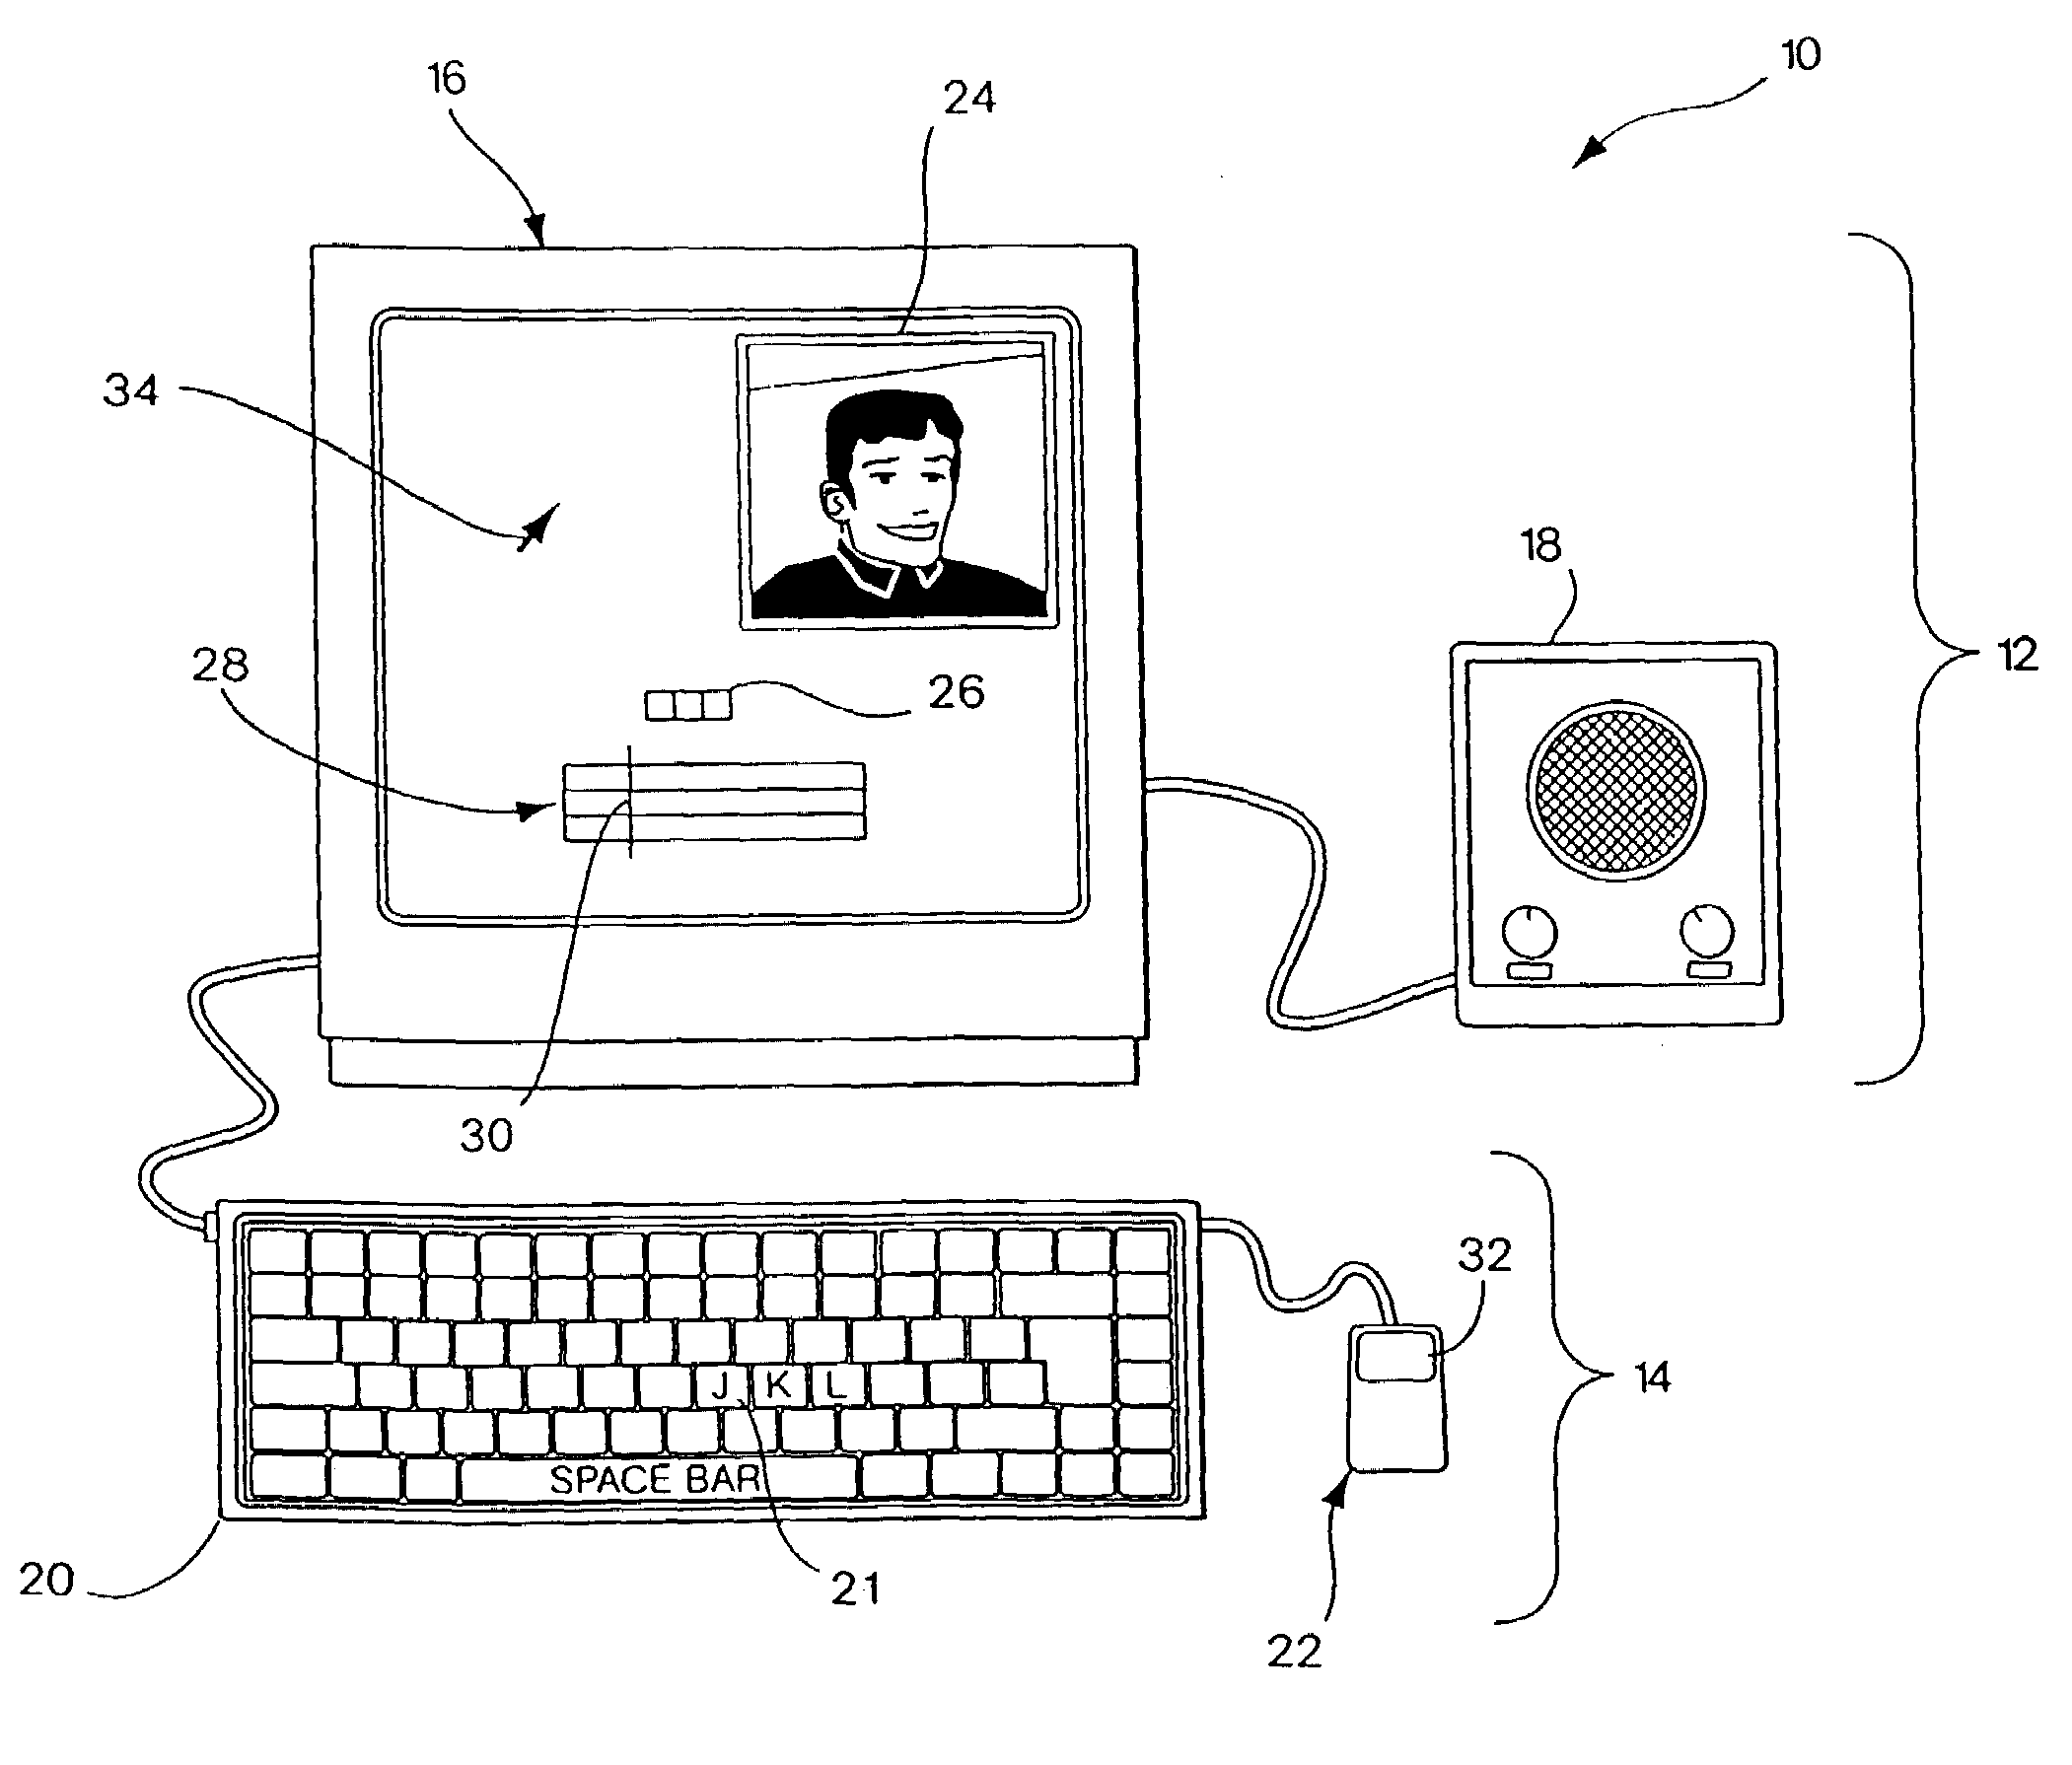 Media composition system with keyboard-based editing controls